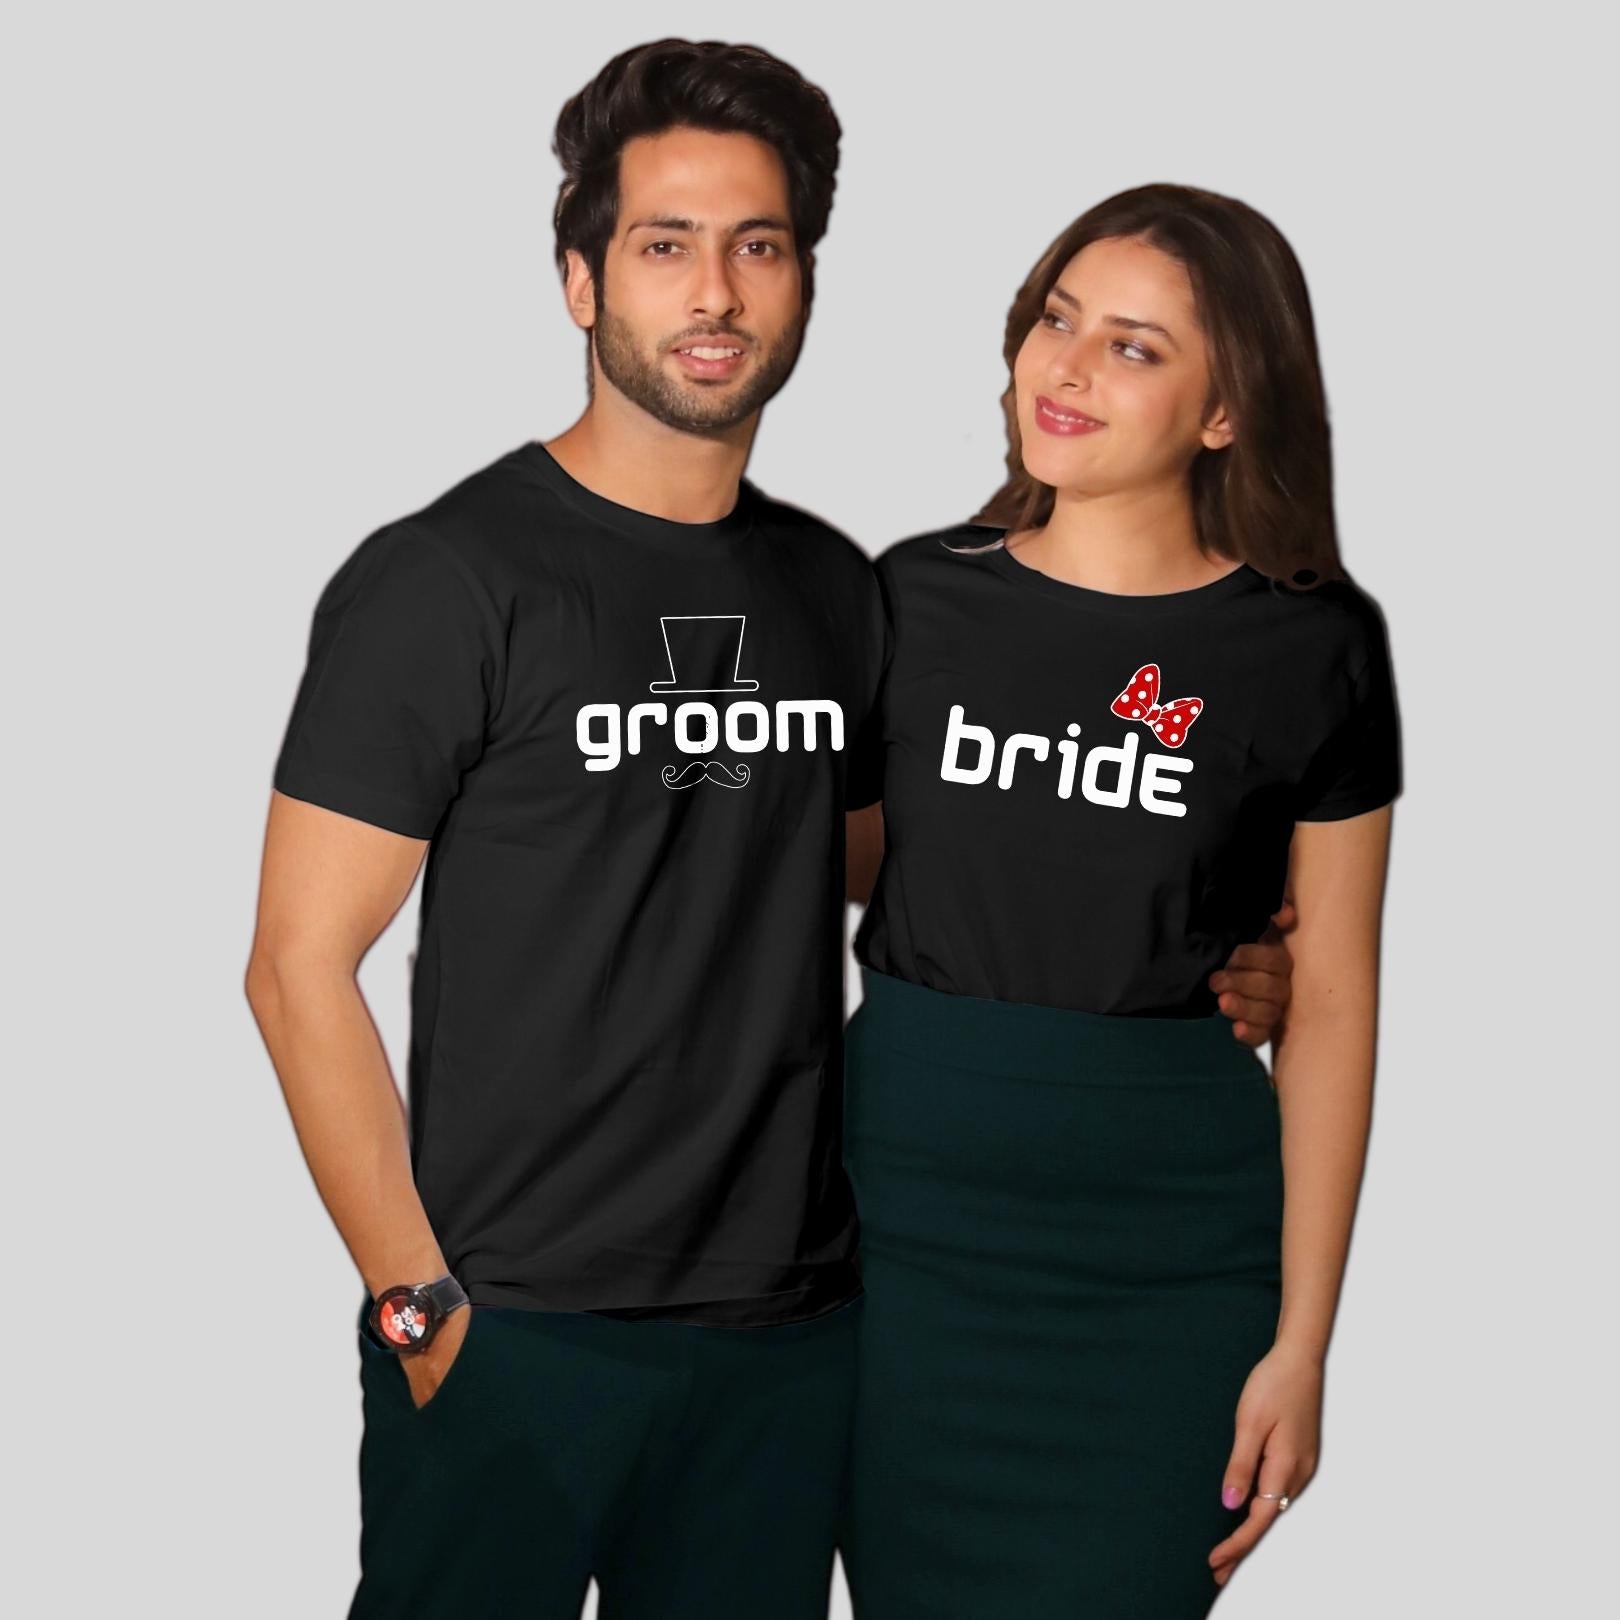 Couple T Shirt For Husband Wife In Black Colour - Groom Bride Variant